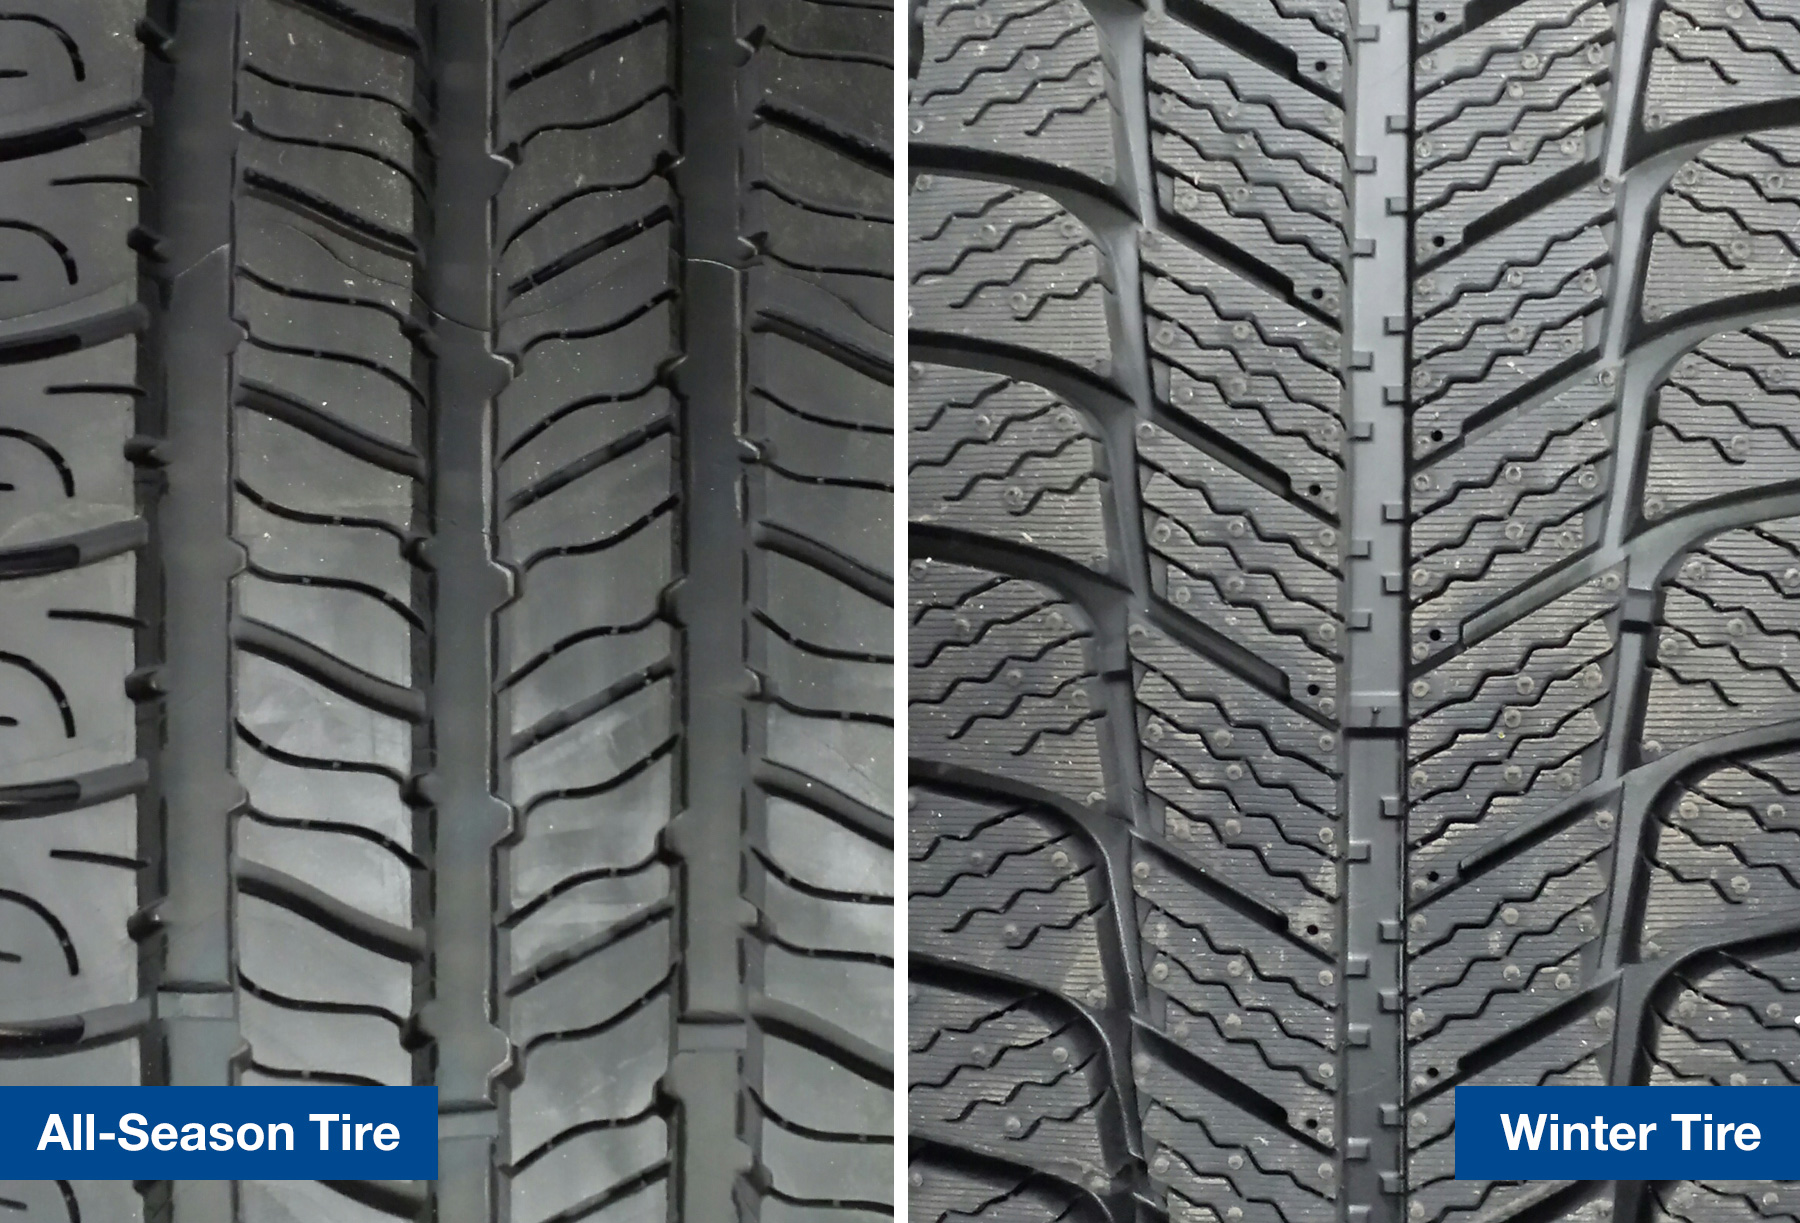 Winter tires side by side with all-season tires